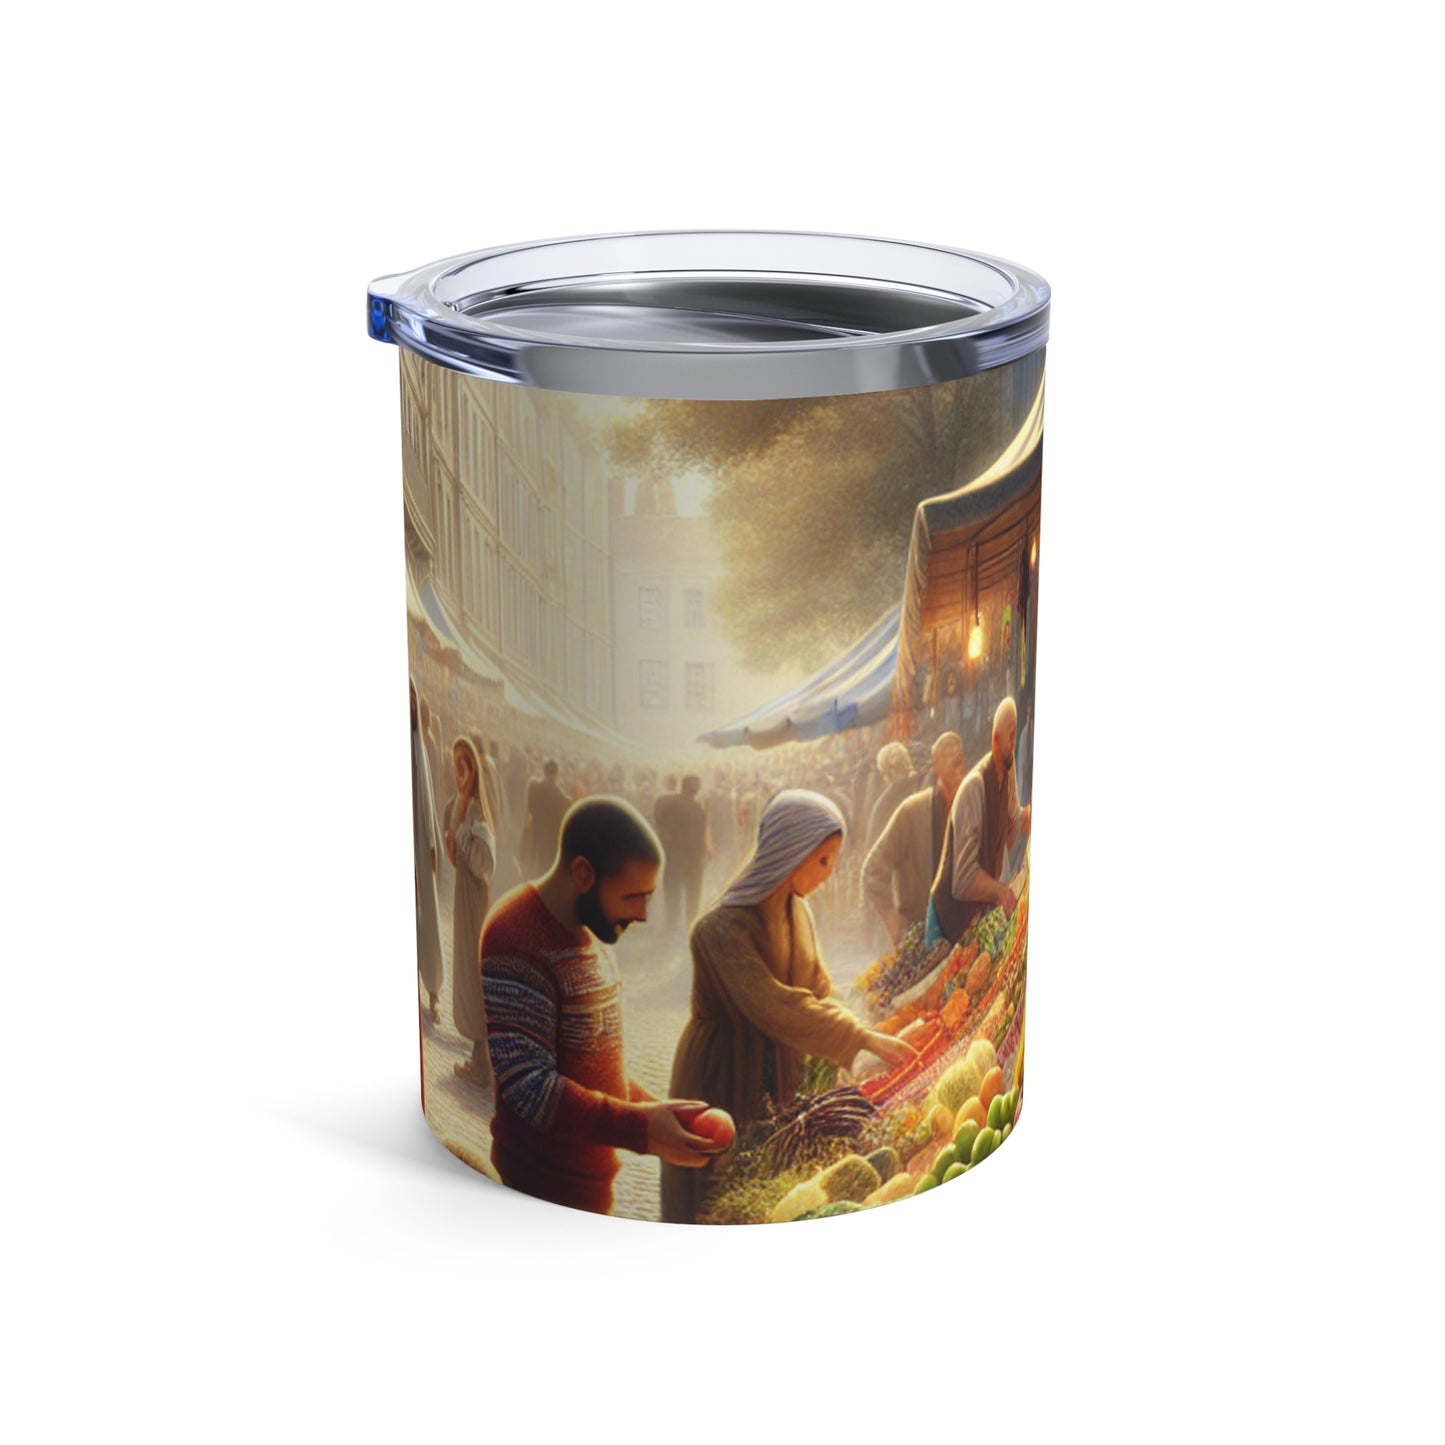 "Sunny Vibes at the Outdoor Market" - The Alien Tumbler 10oz Realism Style